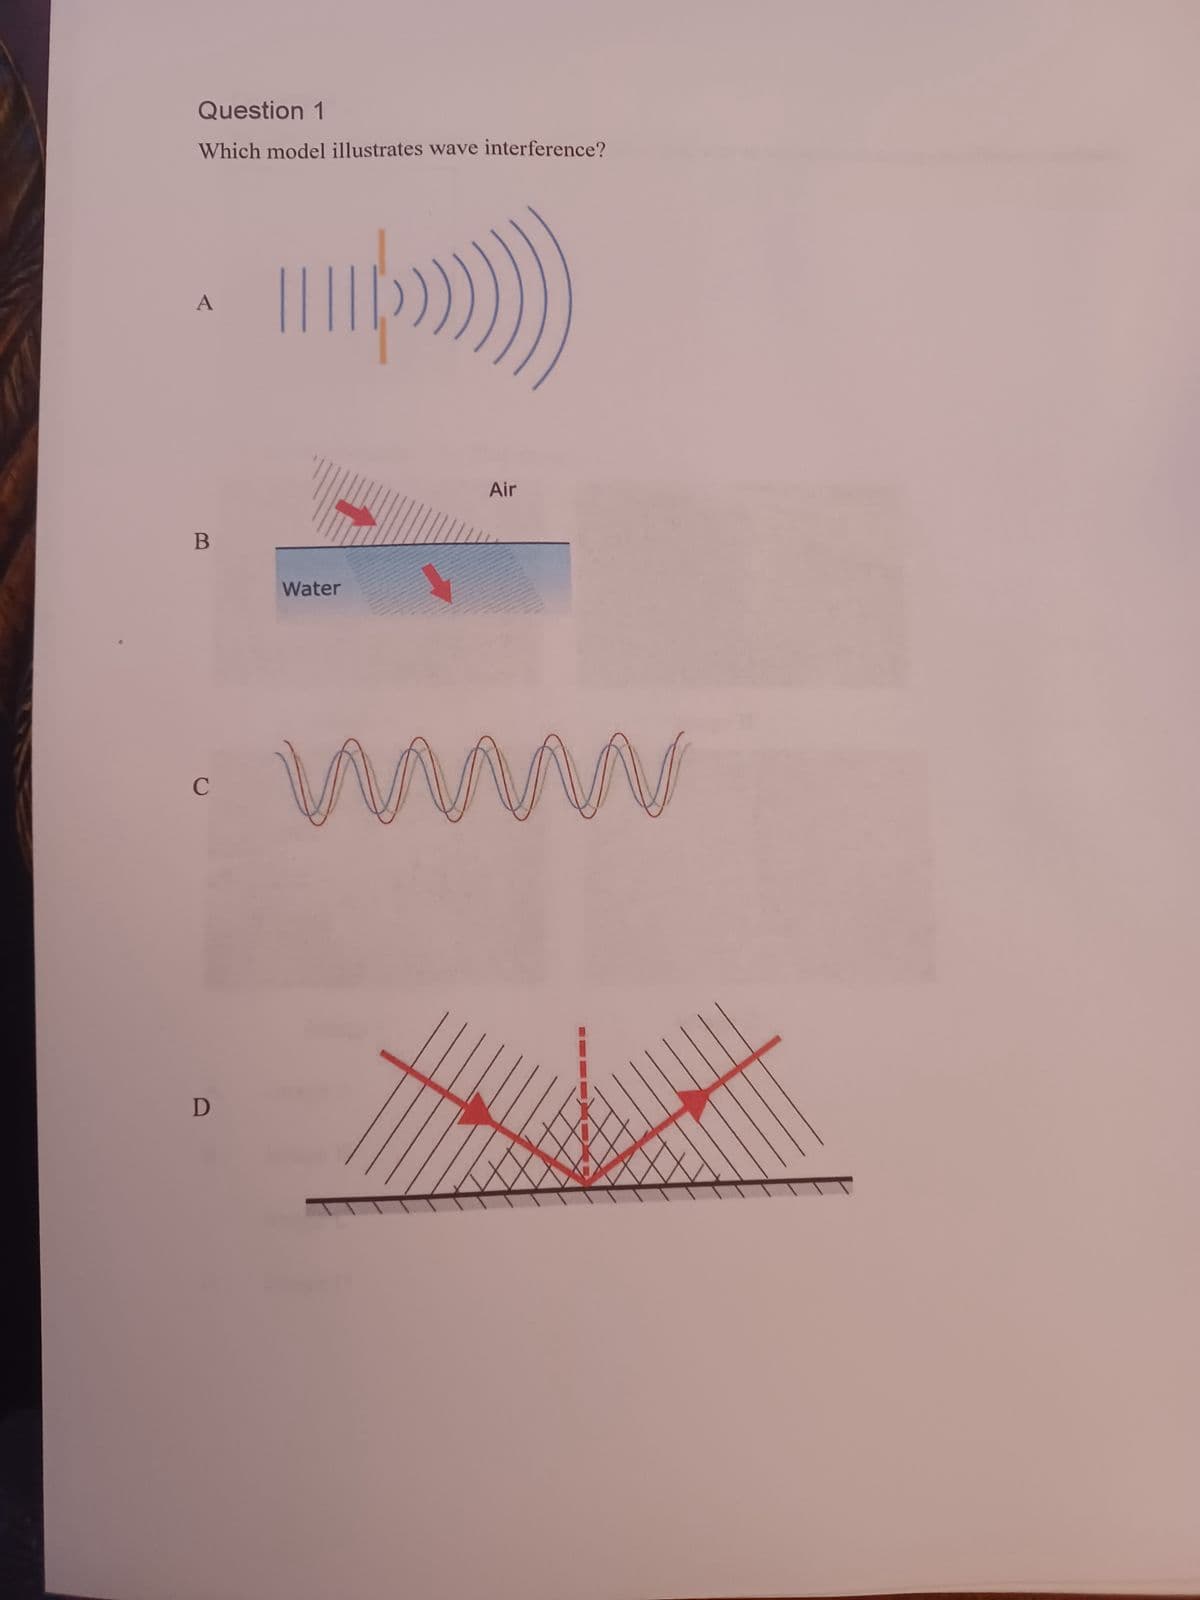 Question 1
Which model illustrates wave interference?
B
C
D
in()
Water
Air
ww